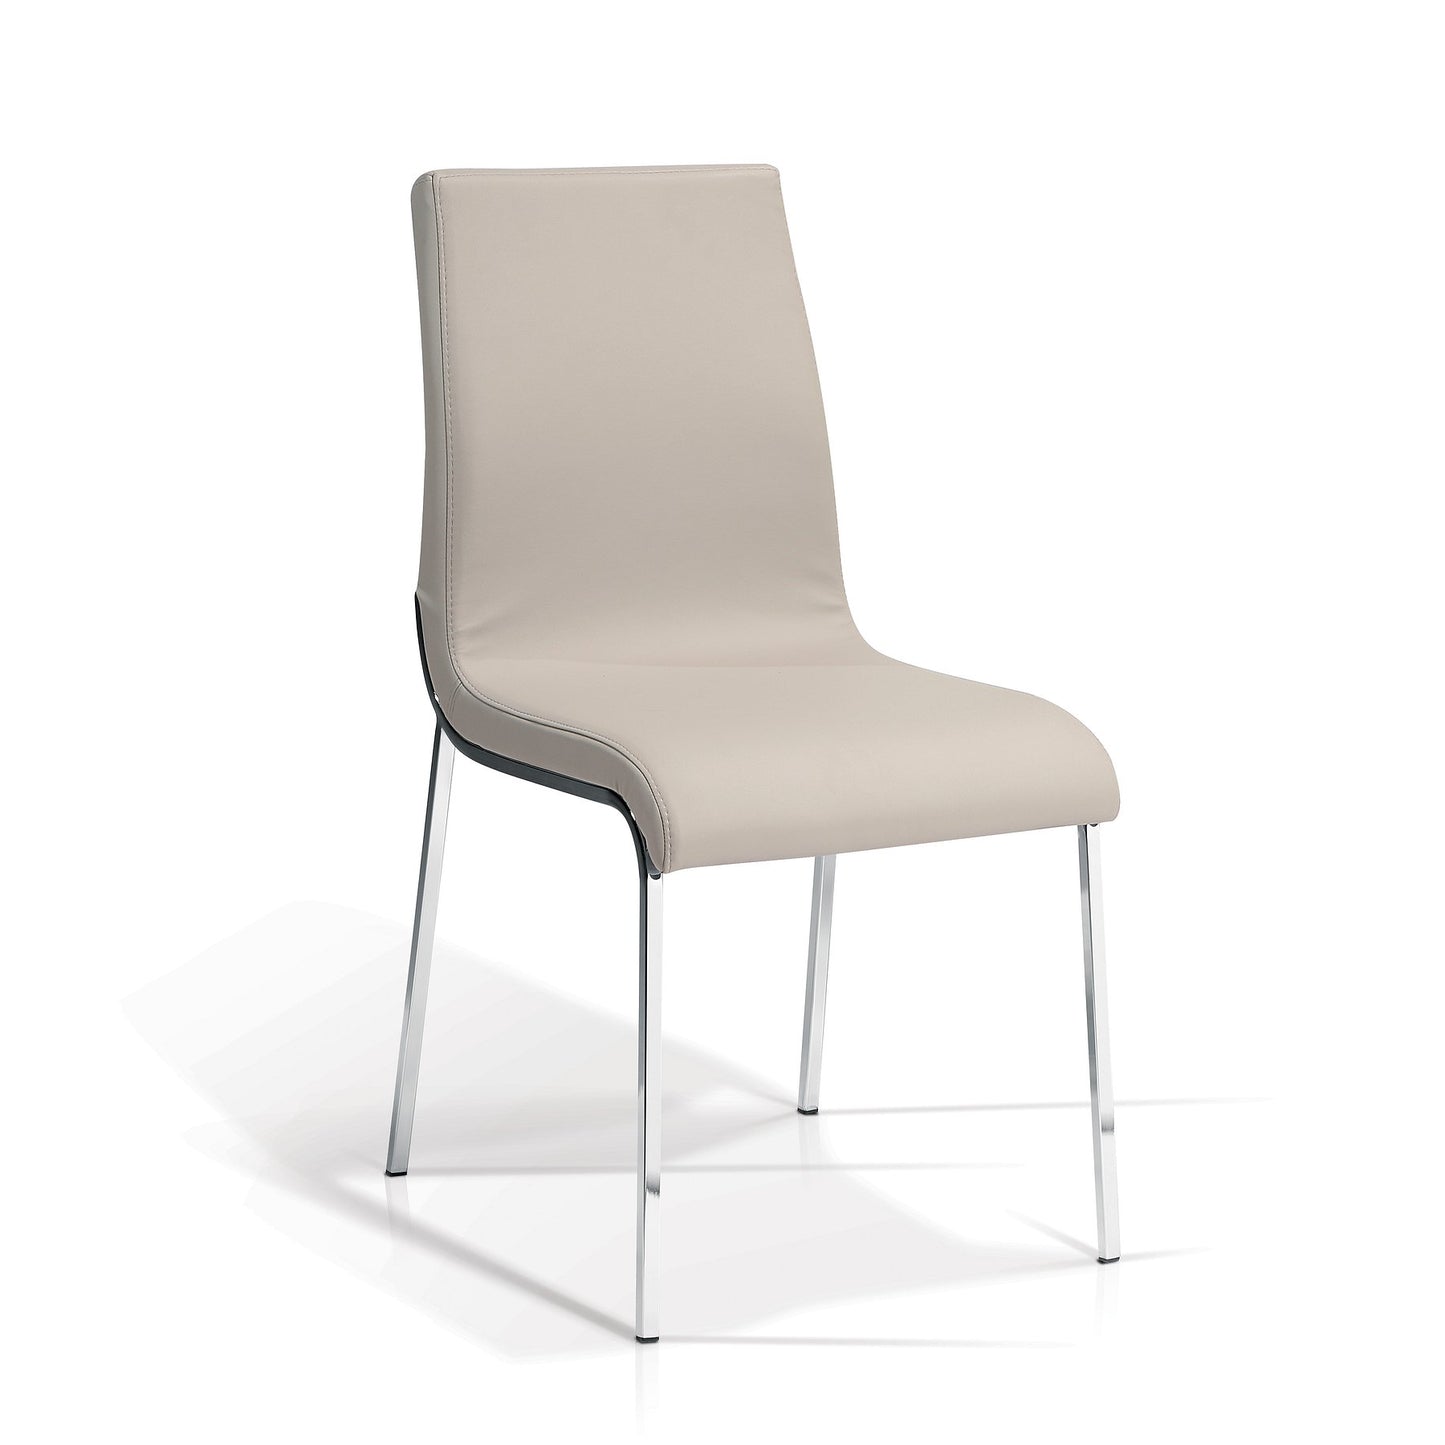 SEF314180 max - dining chair - Dreamart Gallery